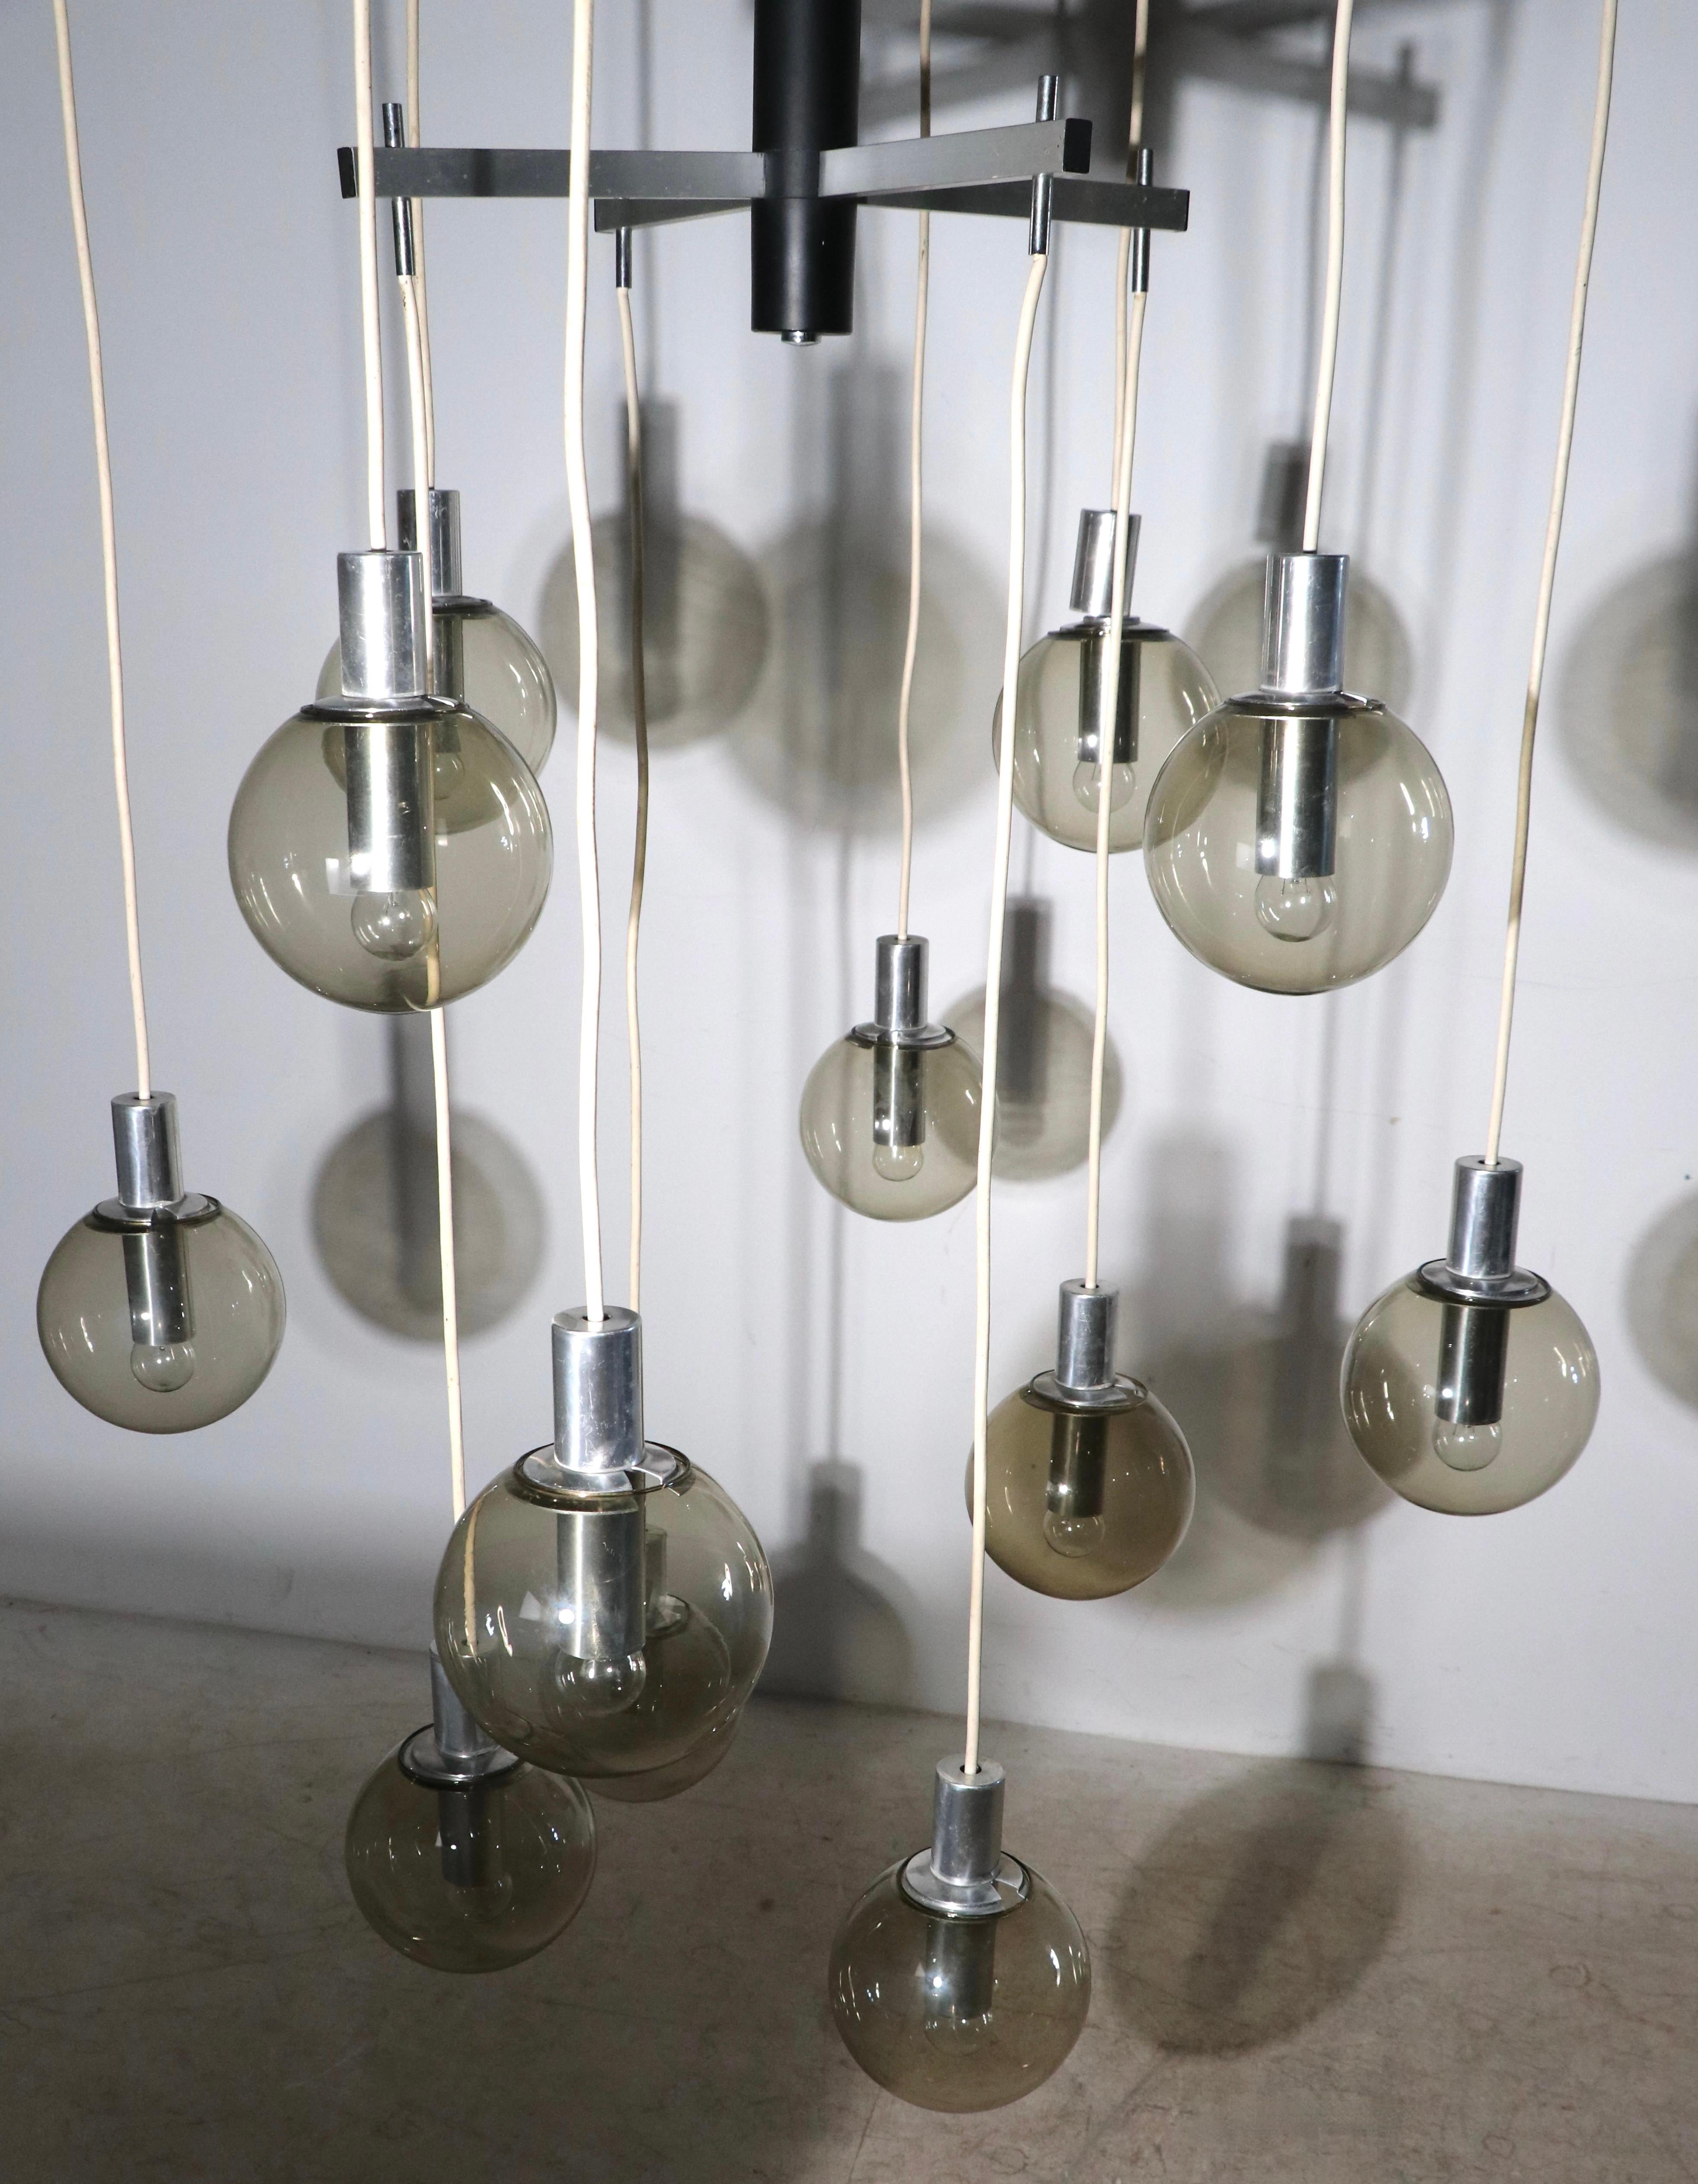 Impressive modernist chandelier having three tiers, of four globes each, with a total of twelve hanging globes. The fixture has a center pole shaft of steel, in black finish, from which radiate twelve rectangular aluminum arms , each supporting a